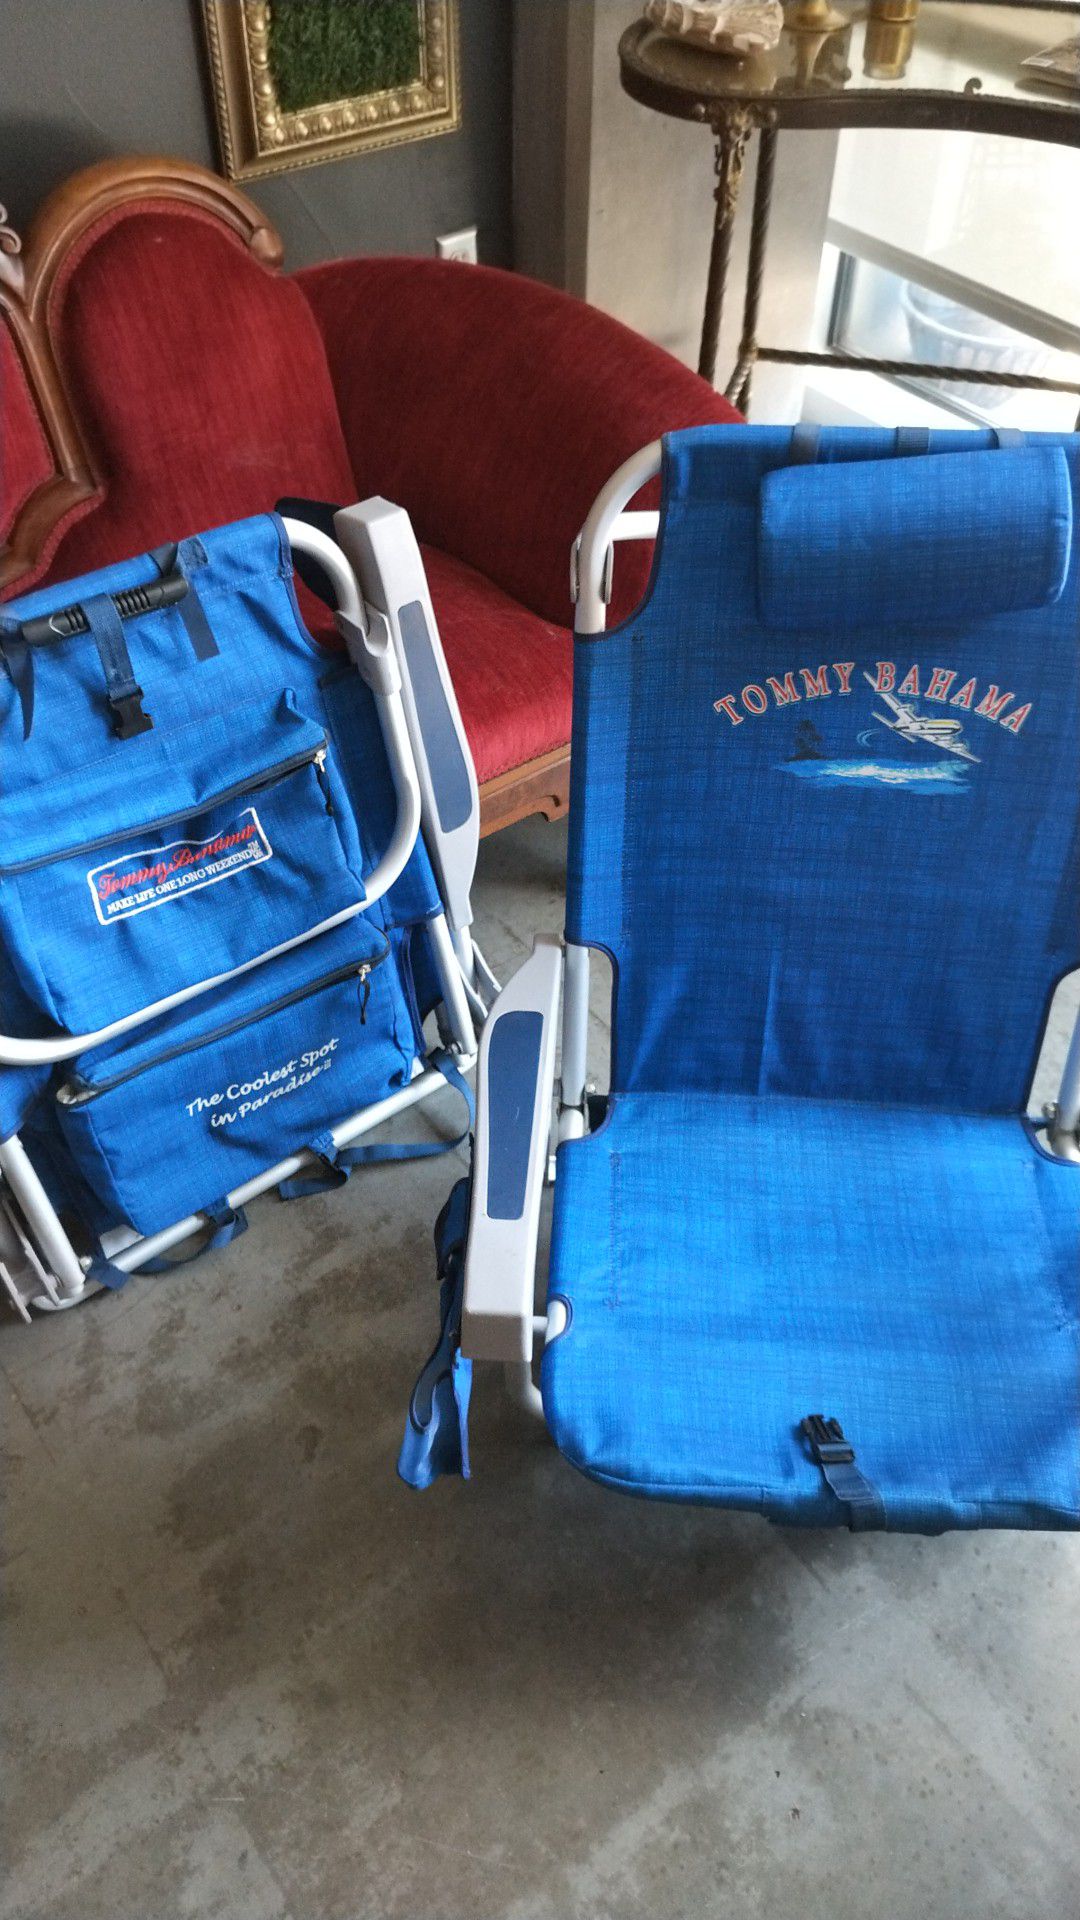 Tommy Bahama backpack chair - pair